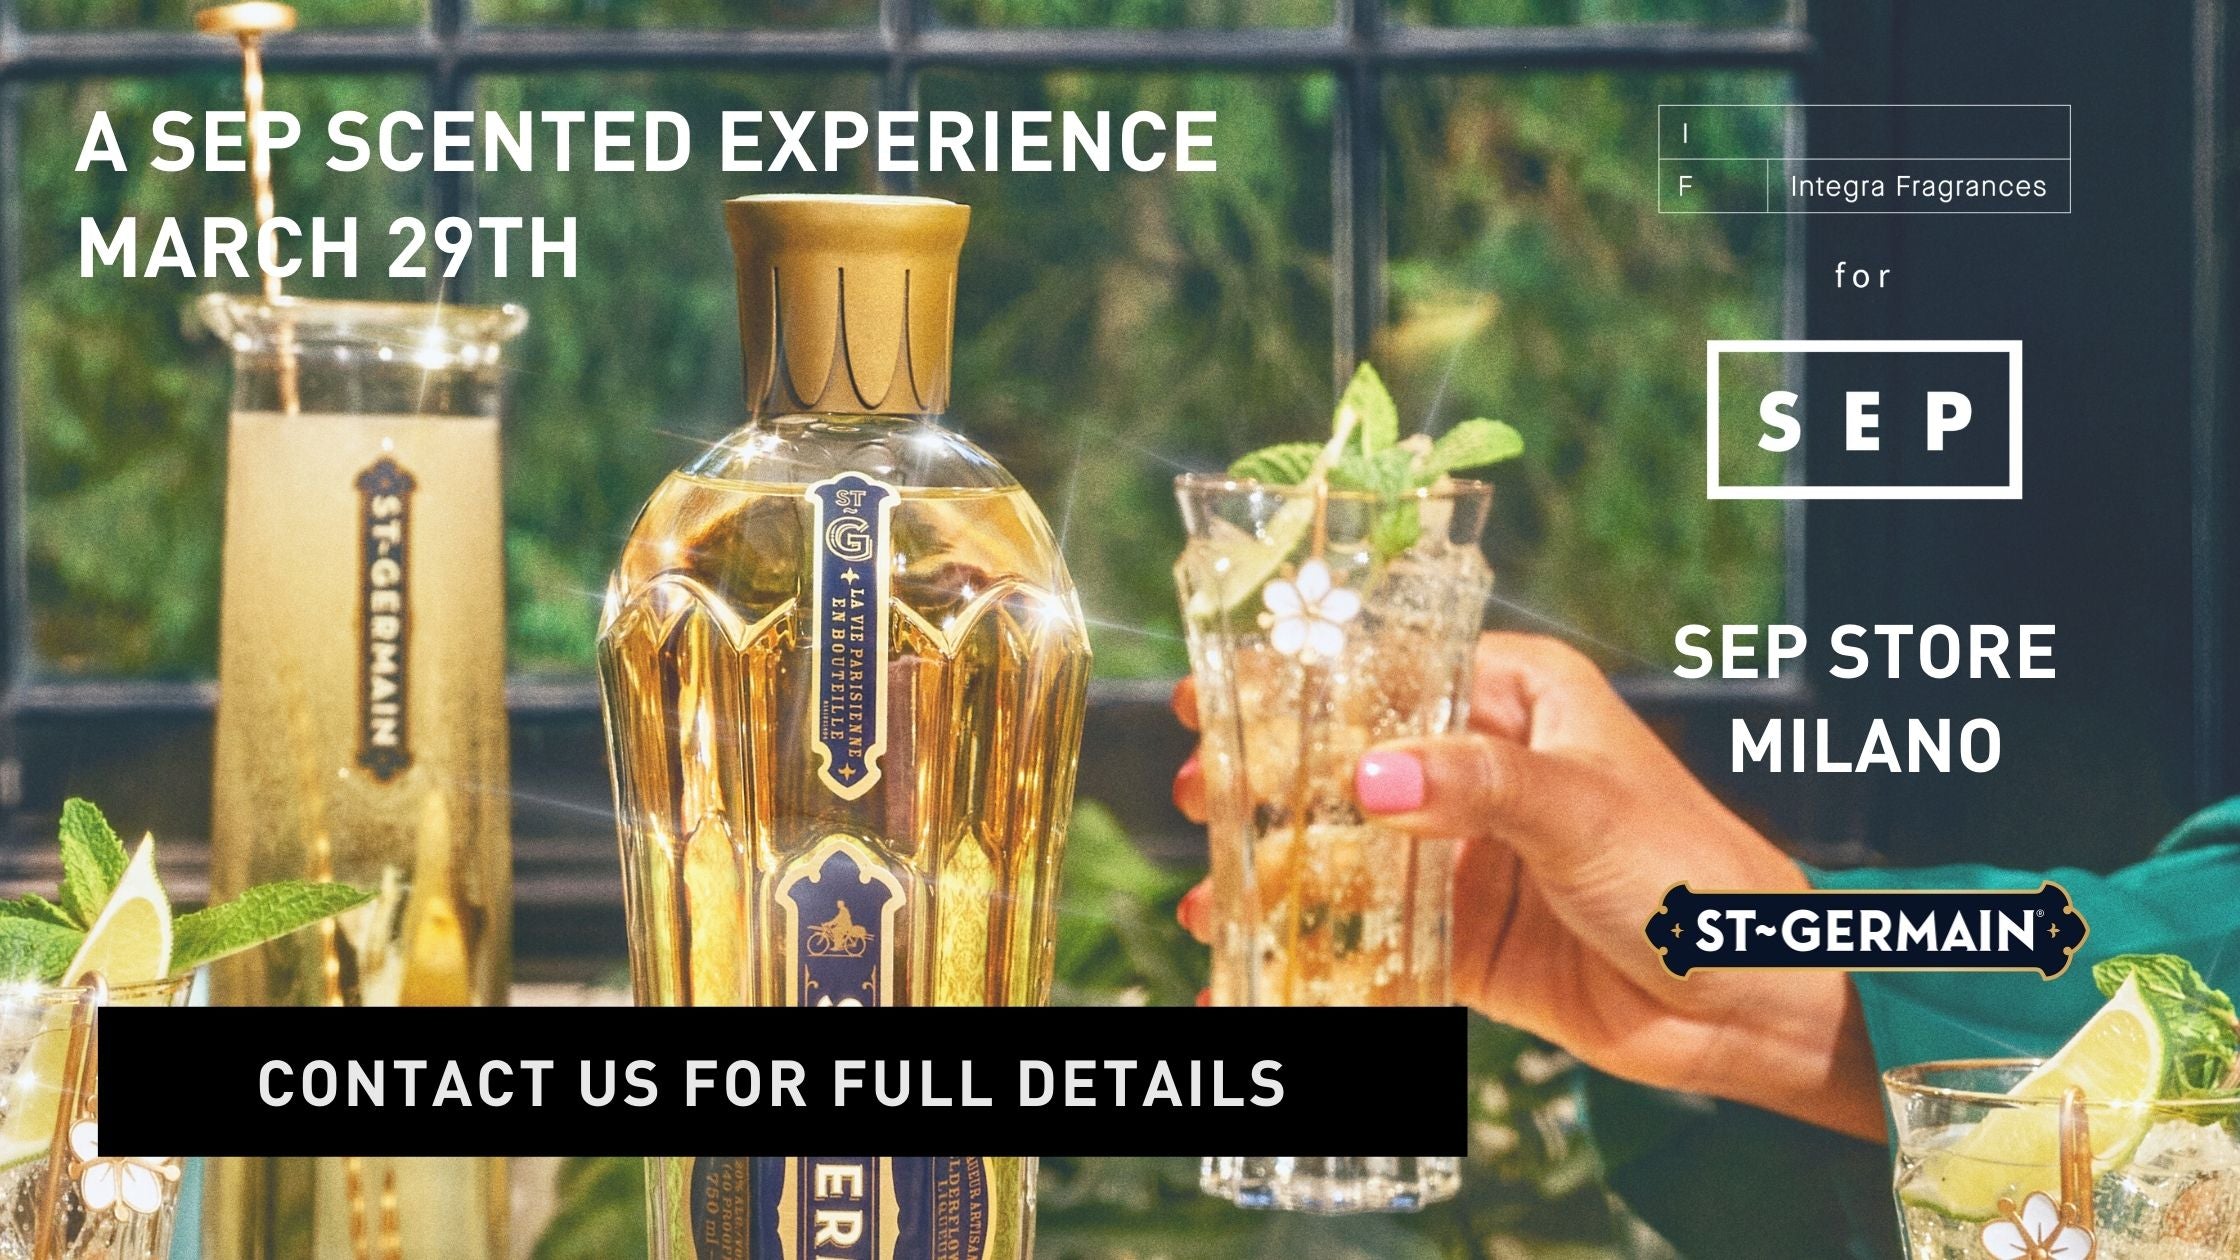 A SEP SCENTED EXPERIENCE march 29th 